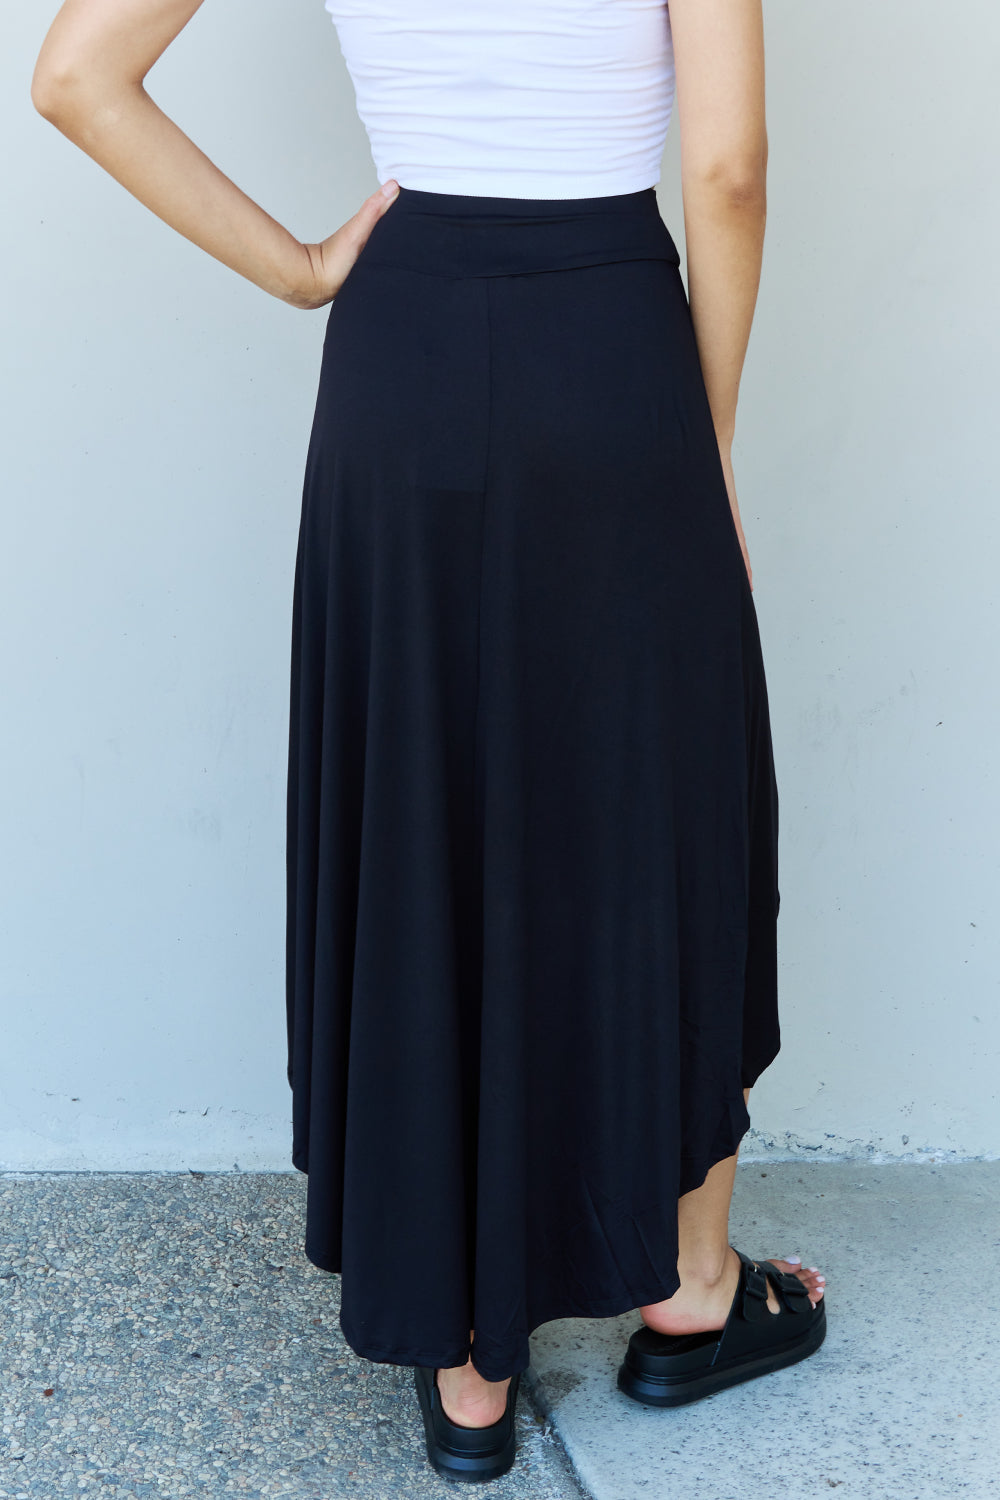 Ninexis First Choice High Waisted Flare Maxi Skirt in Black Ti Amo I love you